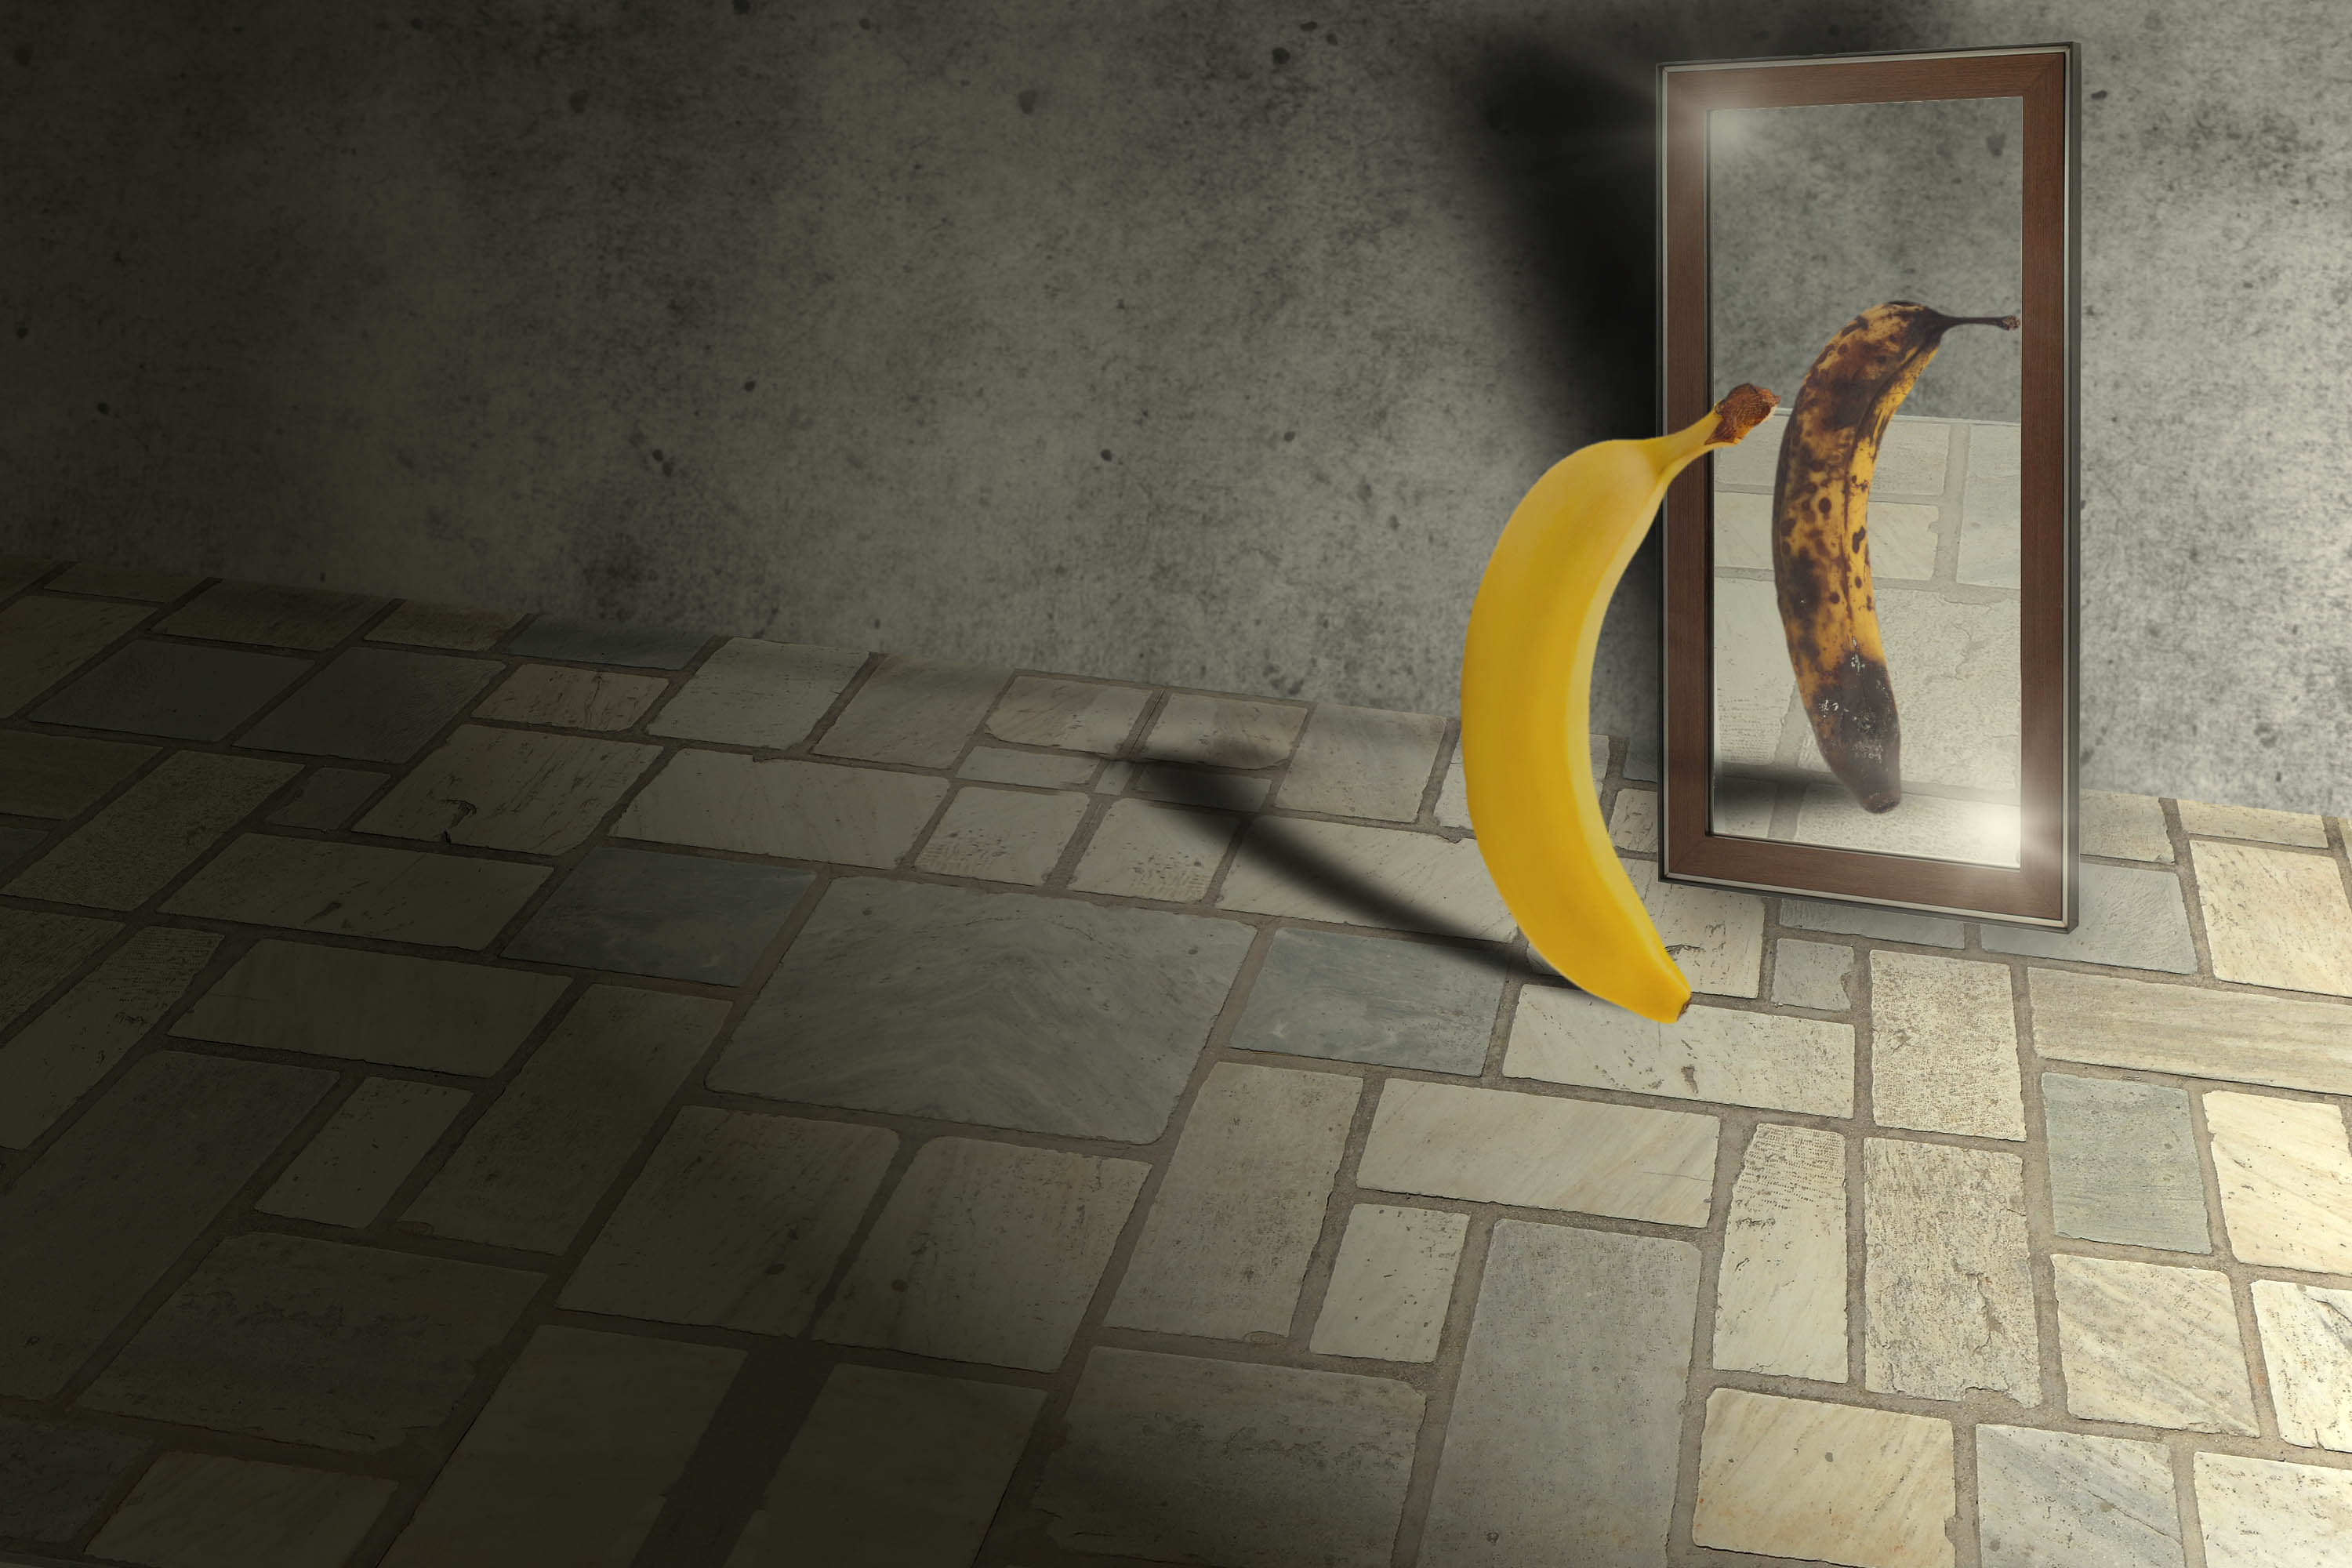 A ripe banana looking in a mirror, rotten banana is reflected back